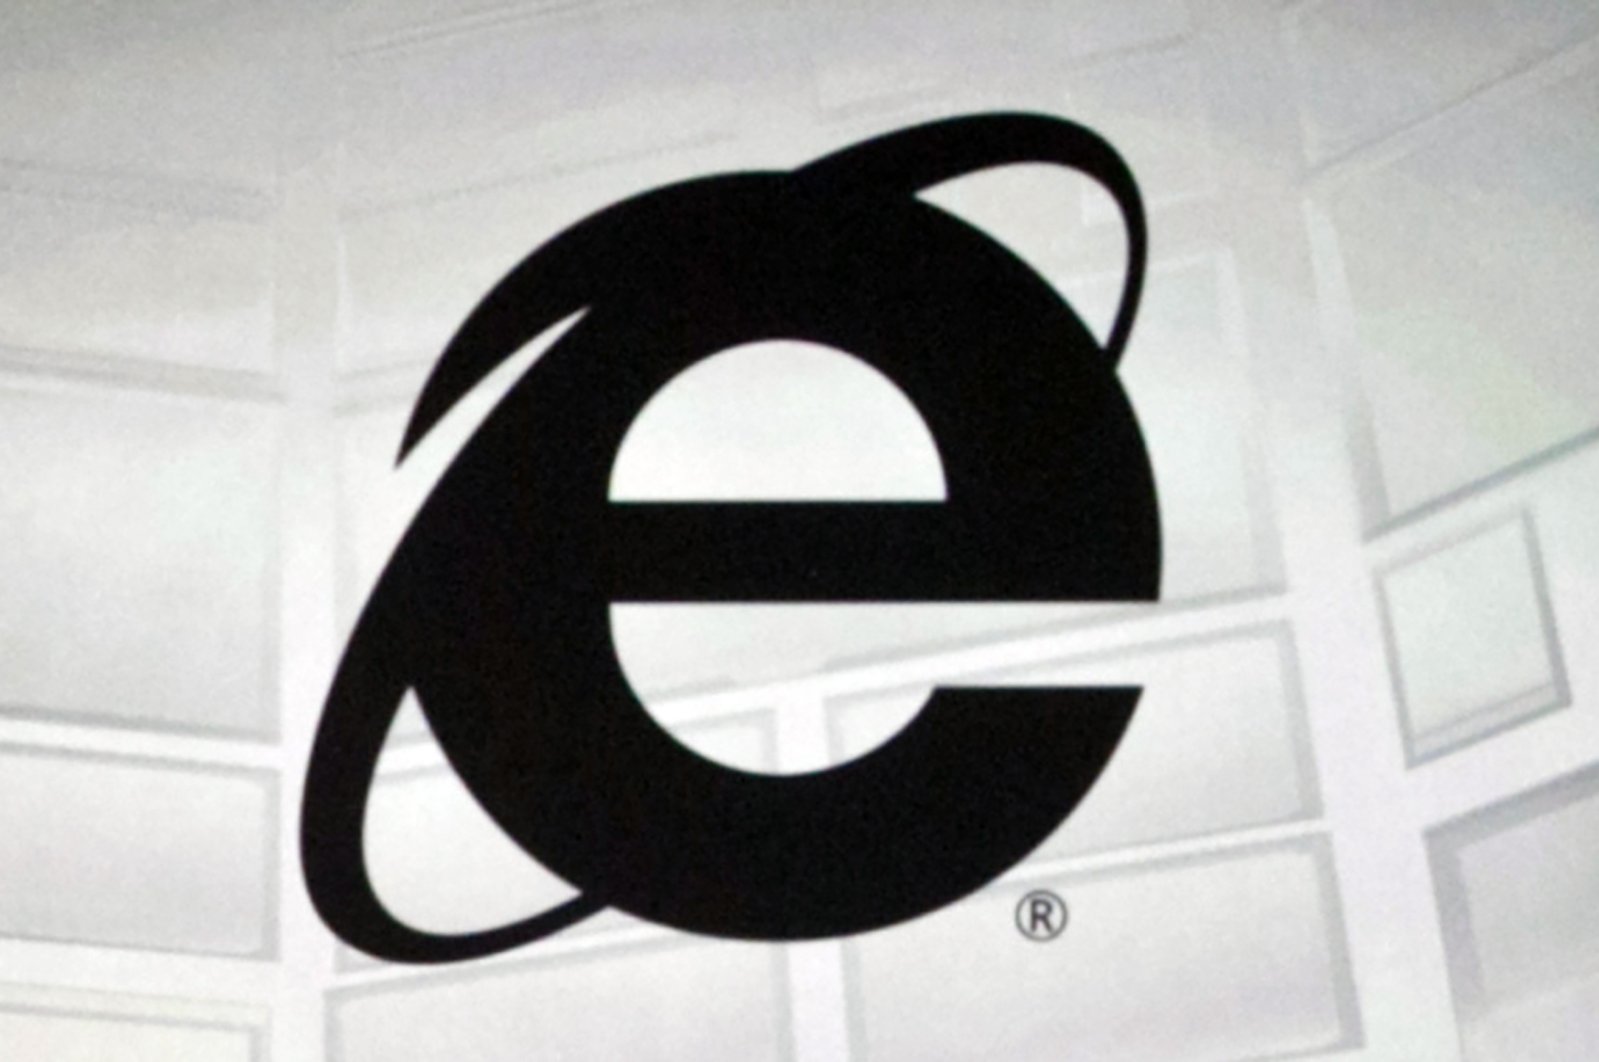 The Microsoft Internet Explorer logo is projected on a screen during a Microsoft Xbox E3 media briefing in Los Angeles, June 4, 2012. (AP Photo)